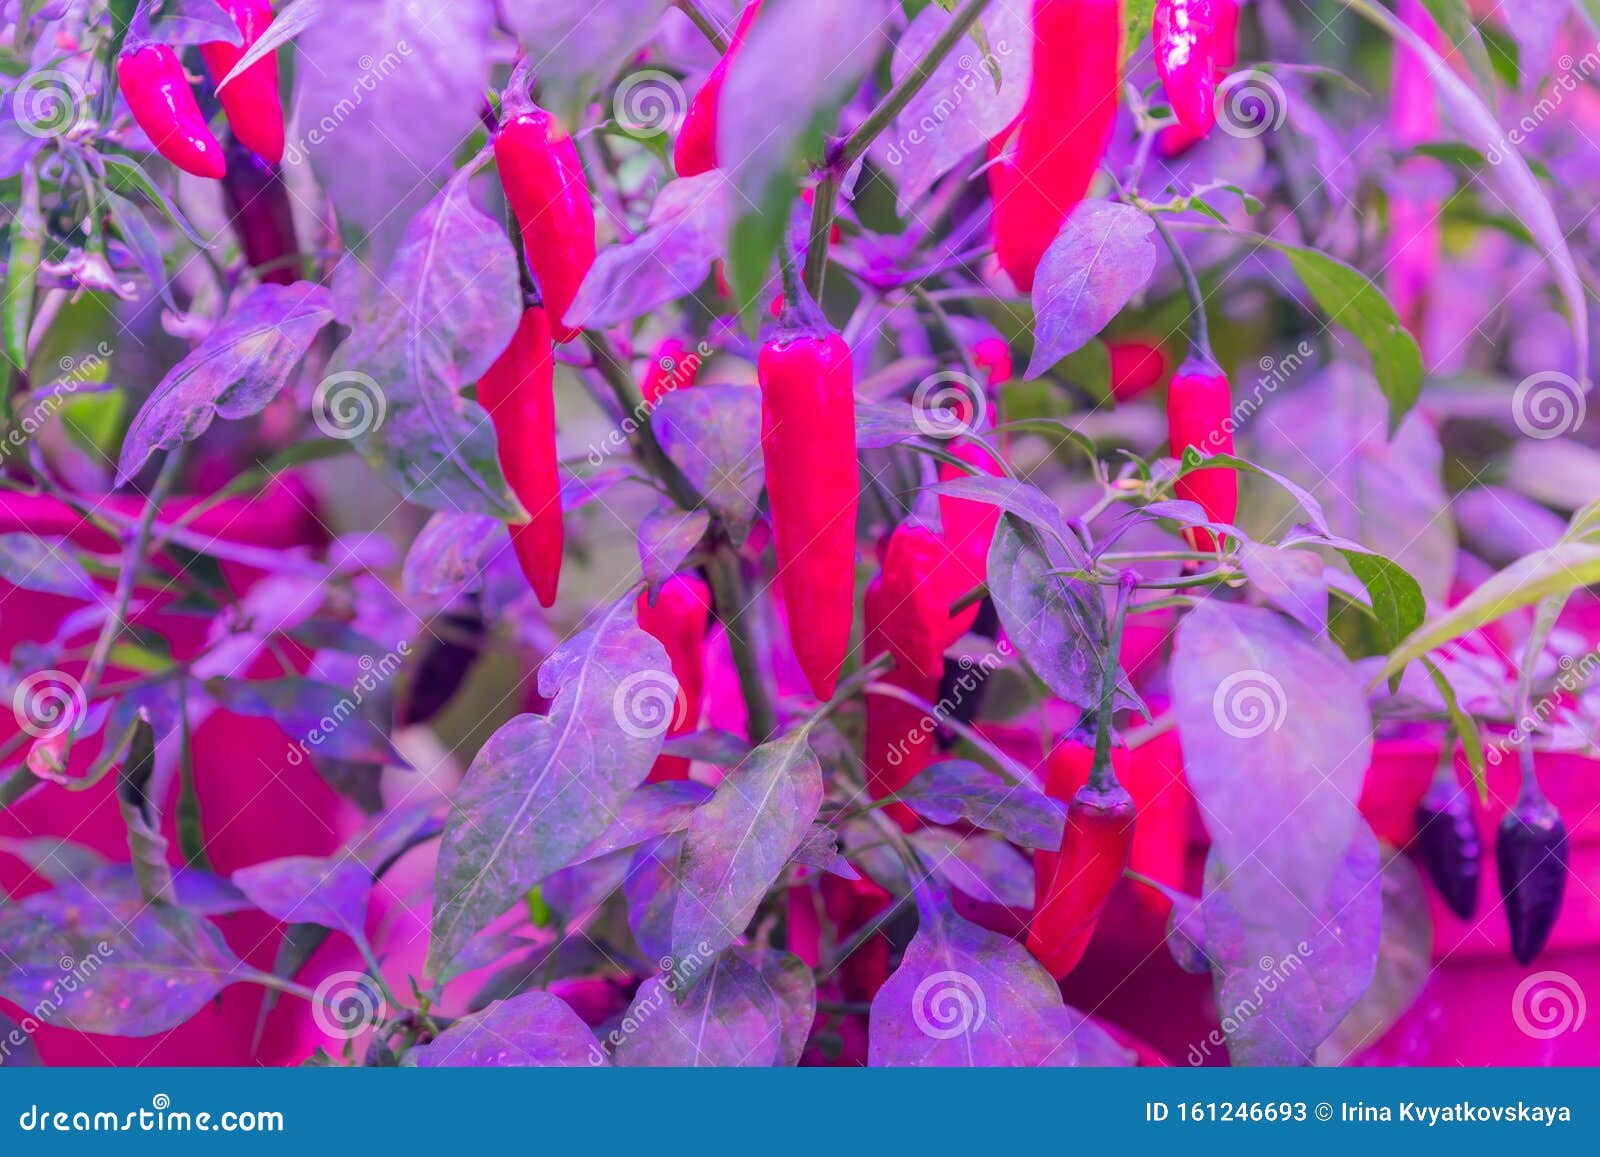 Growing Vegetables Under LED Grow Light Stock Image - Image of closeup